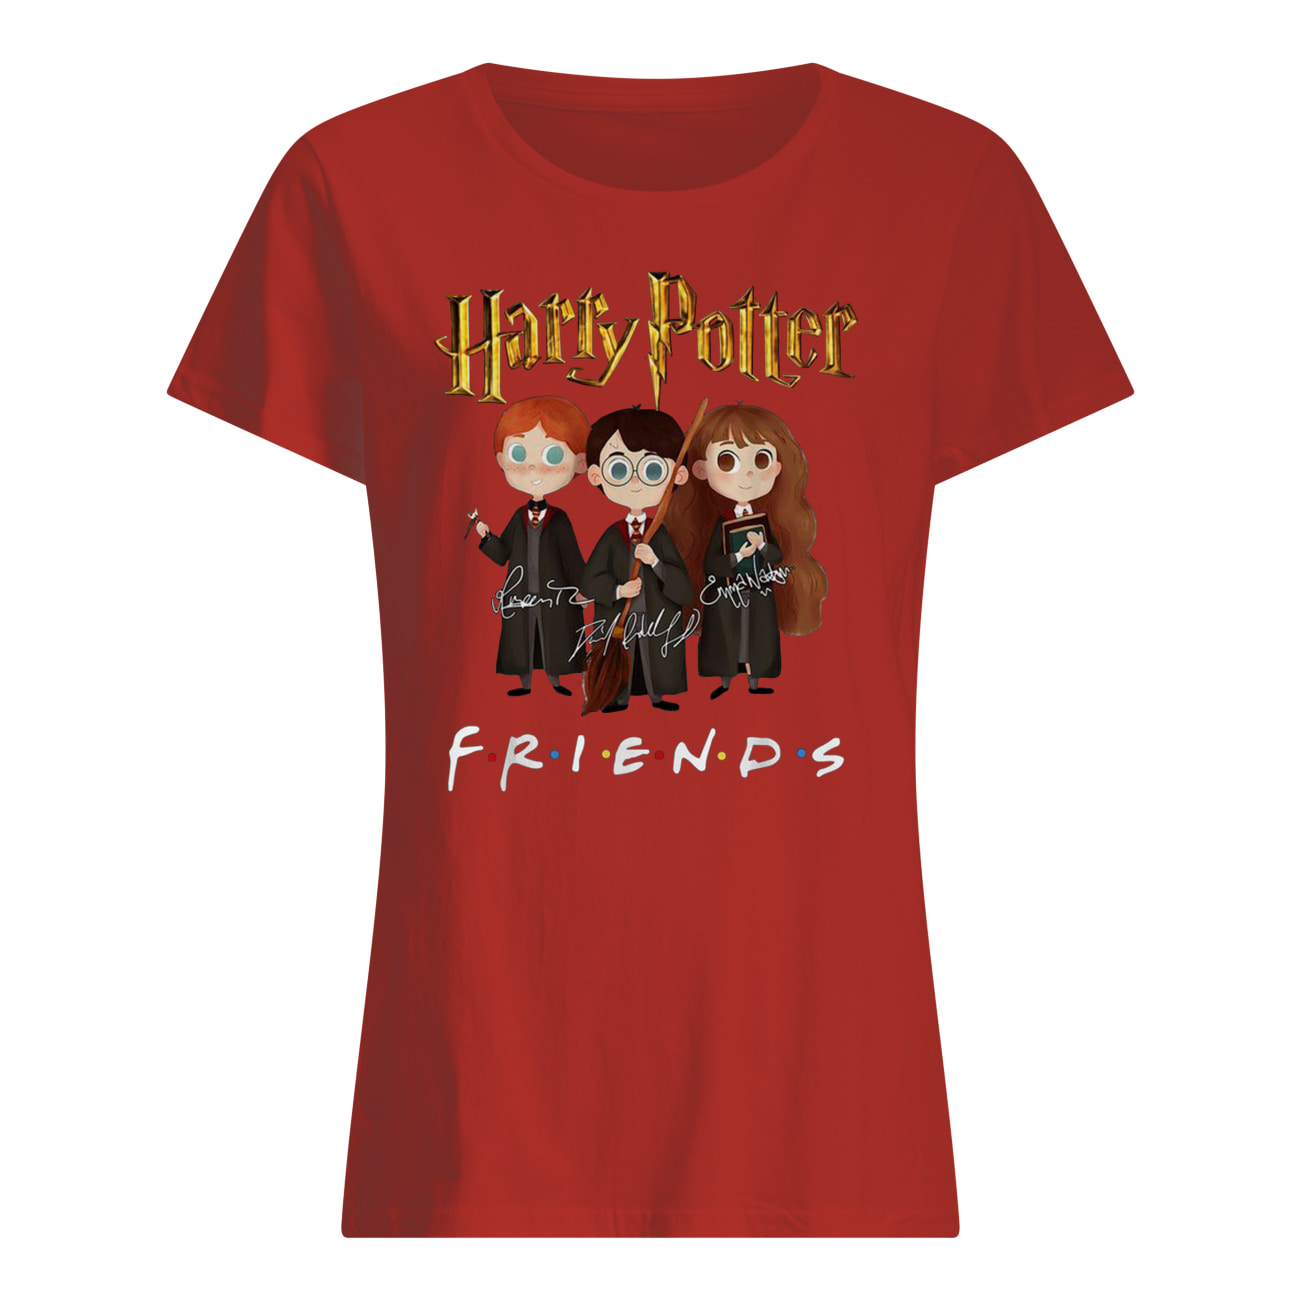 Harry potter characters friends tv show signatures womens shirt